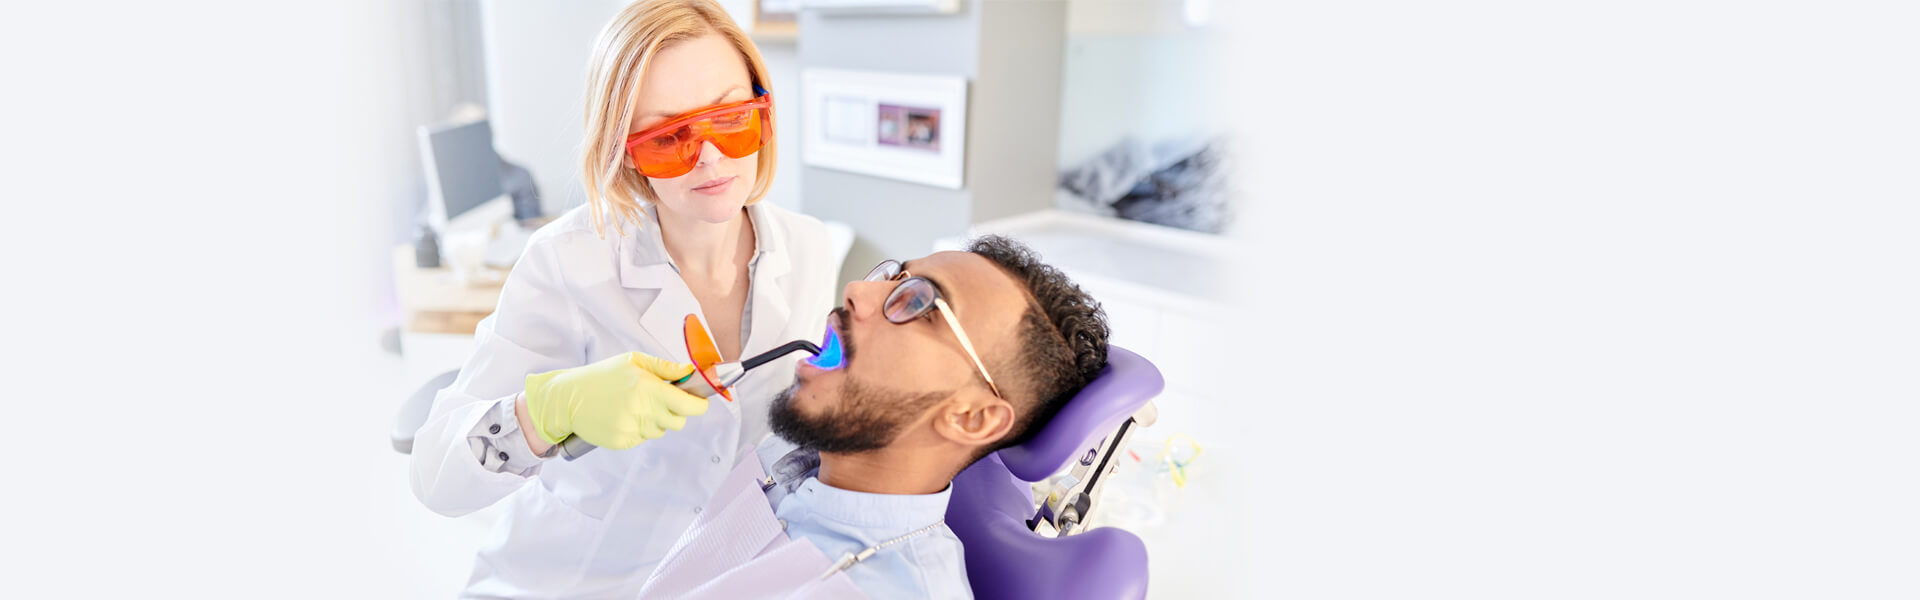 Is Laser Dentistry Better Than Traditional Treatments?